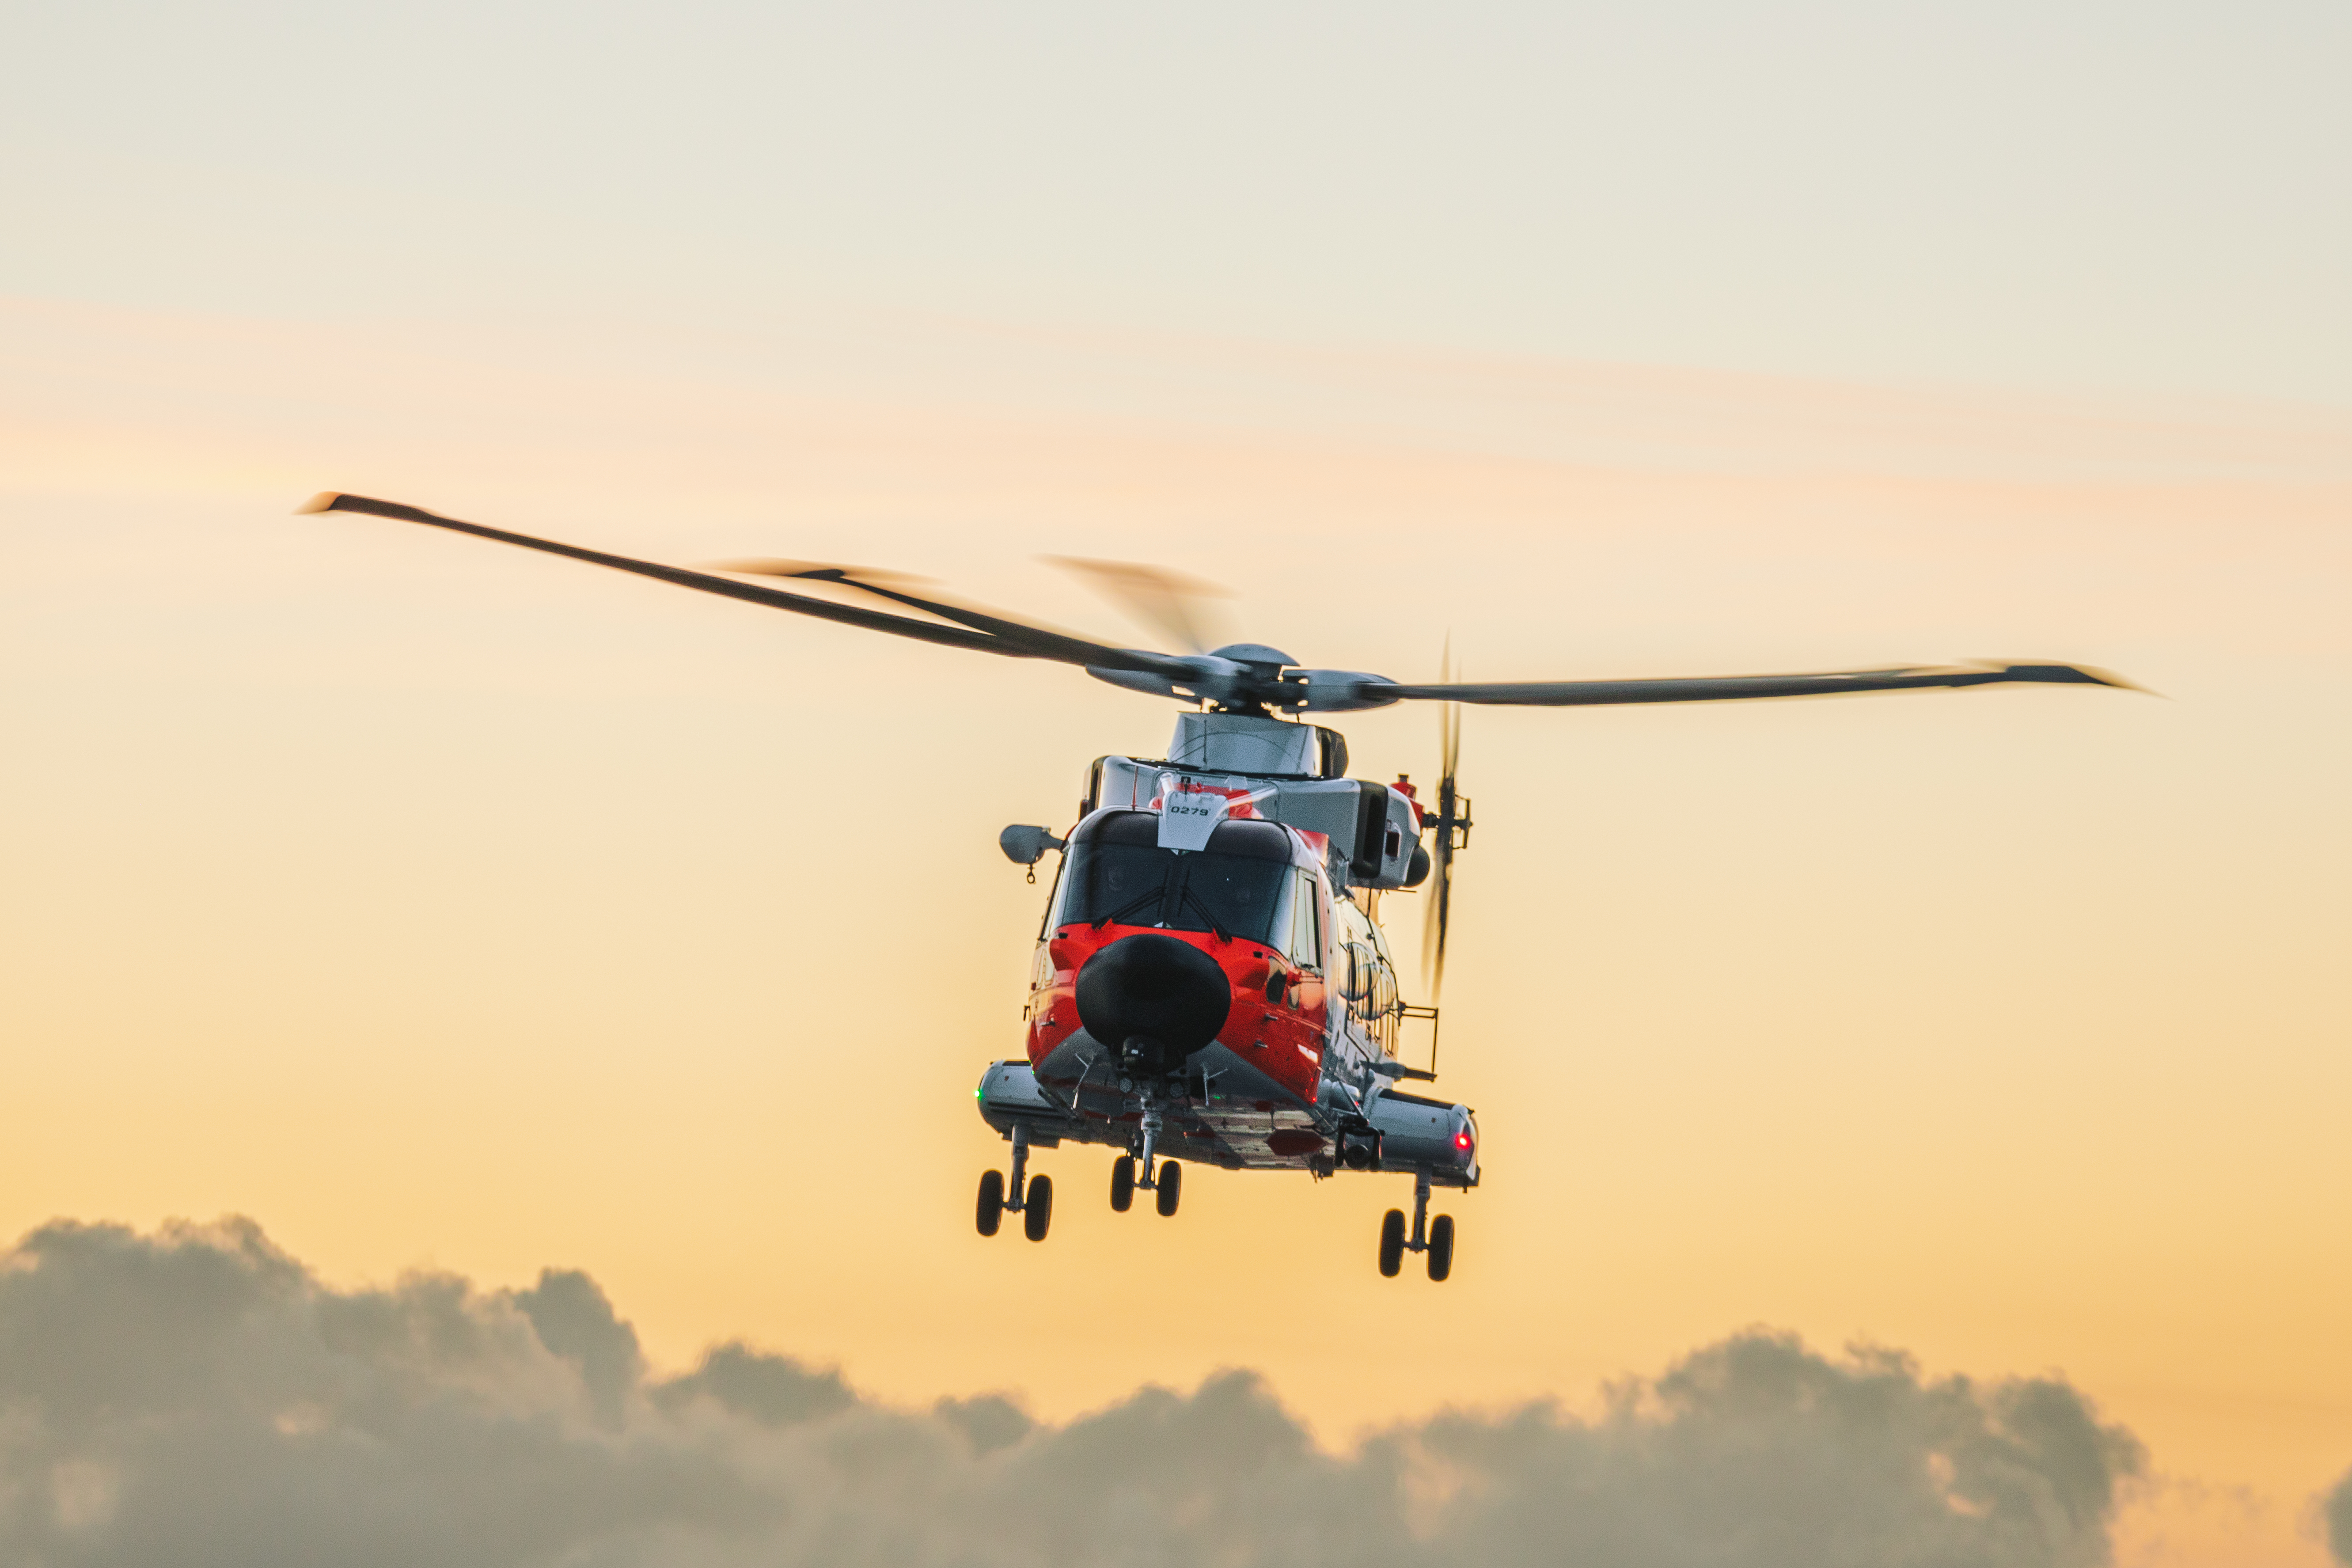 , The first of Norway's new SAR Queen rescue helicopters were put into operation at Sola rescue base in September 2020. The new helicopters will provide greater safety for people along the coast and in remote areas across the country and they are now safely equiped into the SARA Application which is developed by NORCE. Foto: Fabian Helmersen / Forsvaret, 20230327 FH 1463, , 